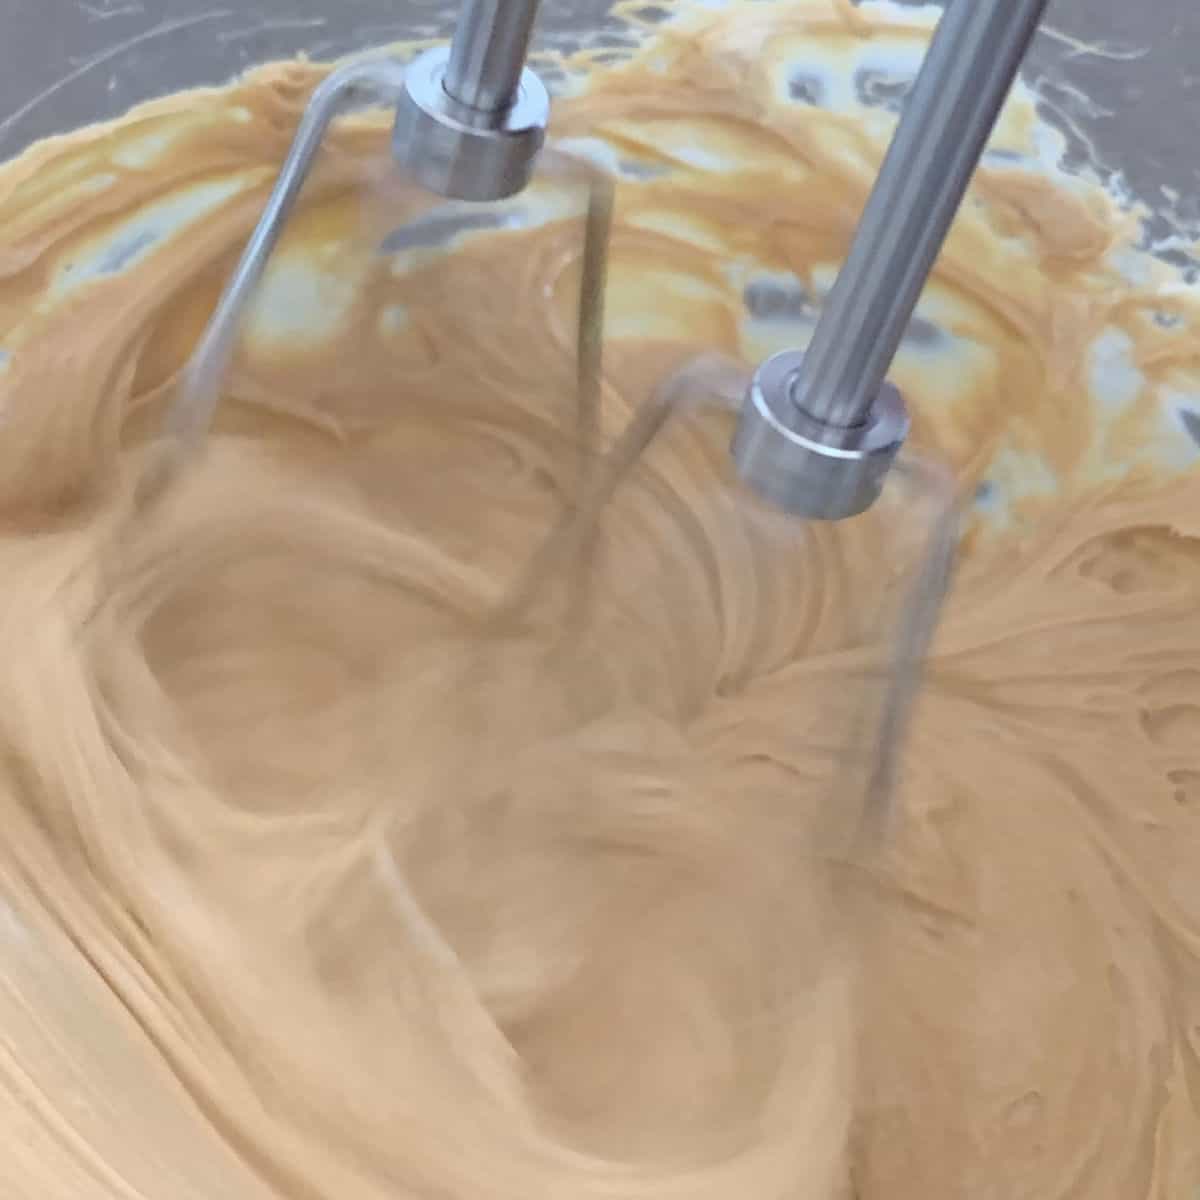 Making the frosting.